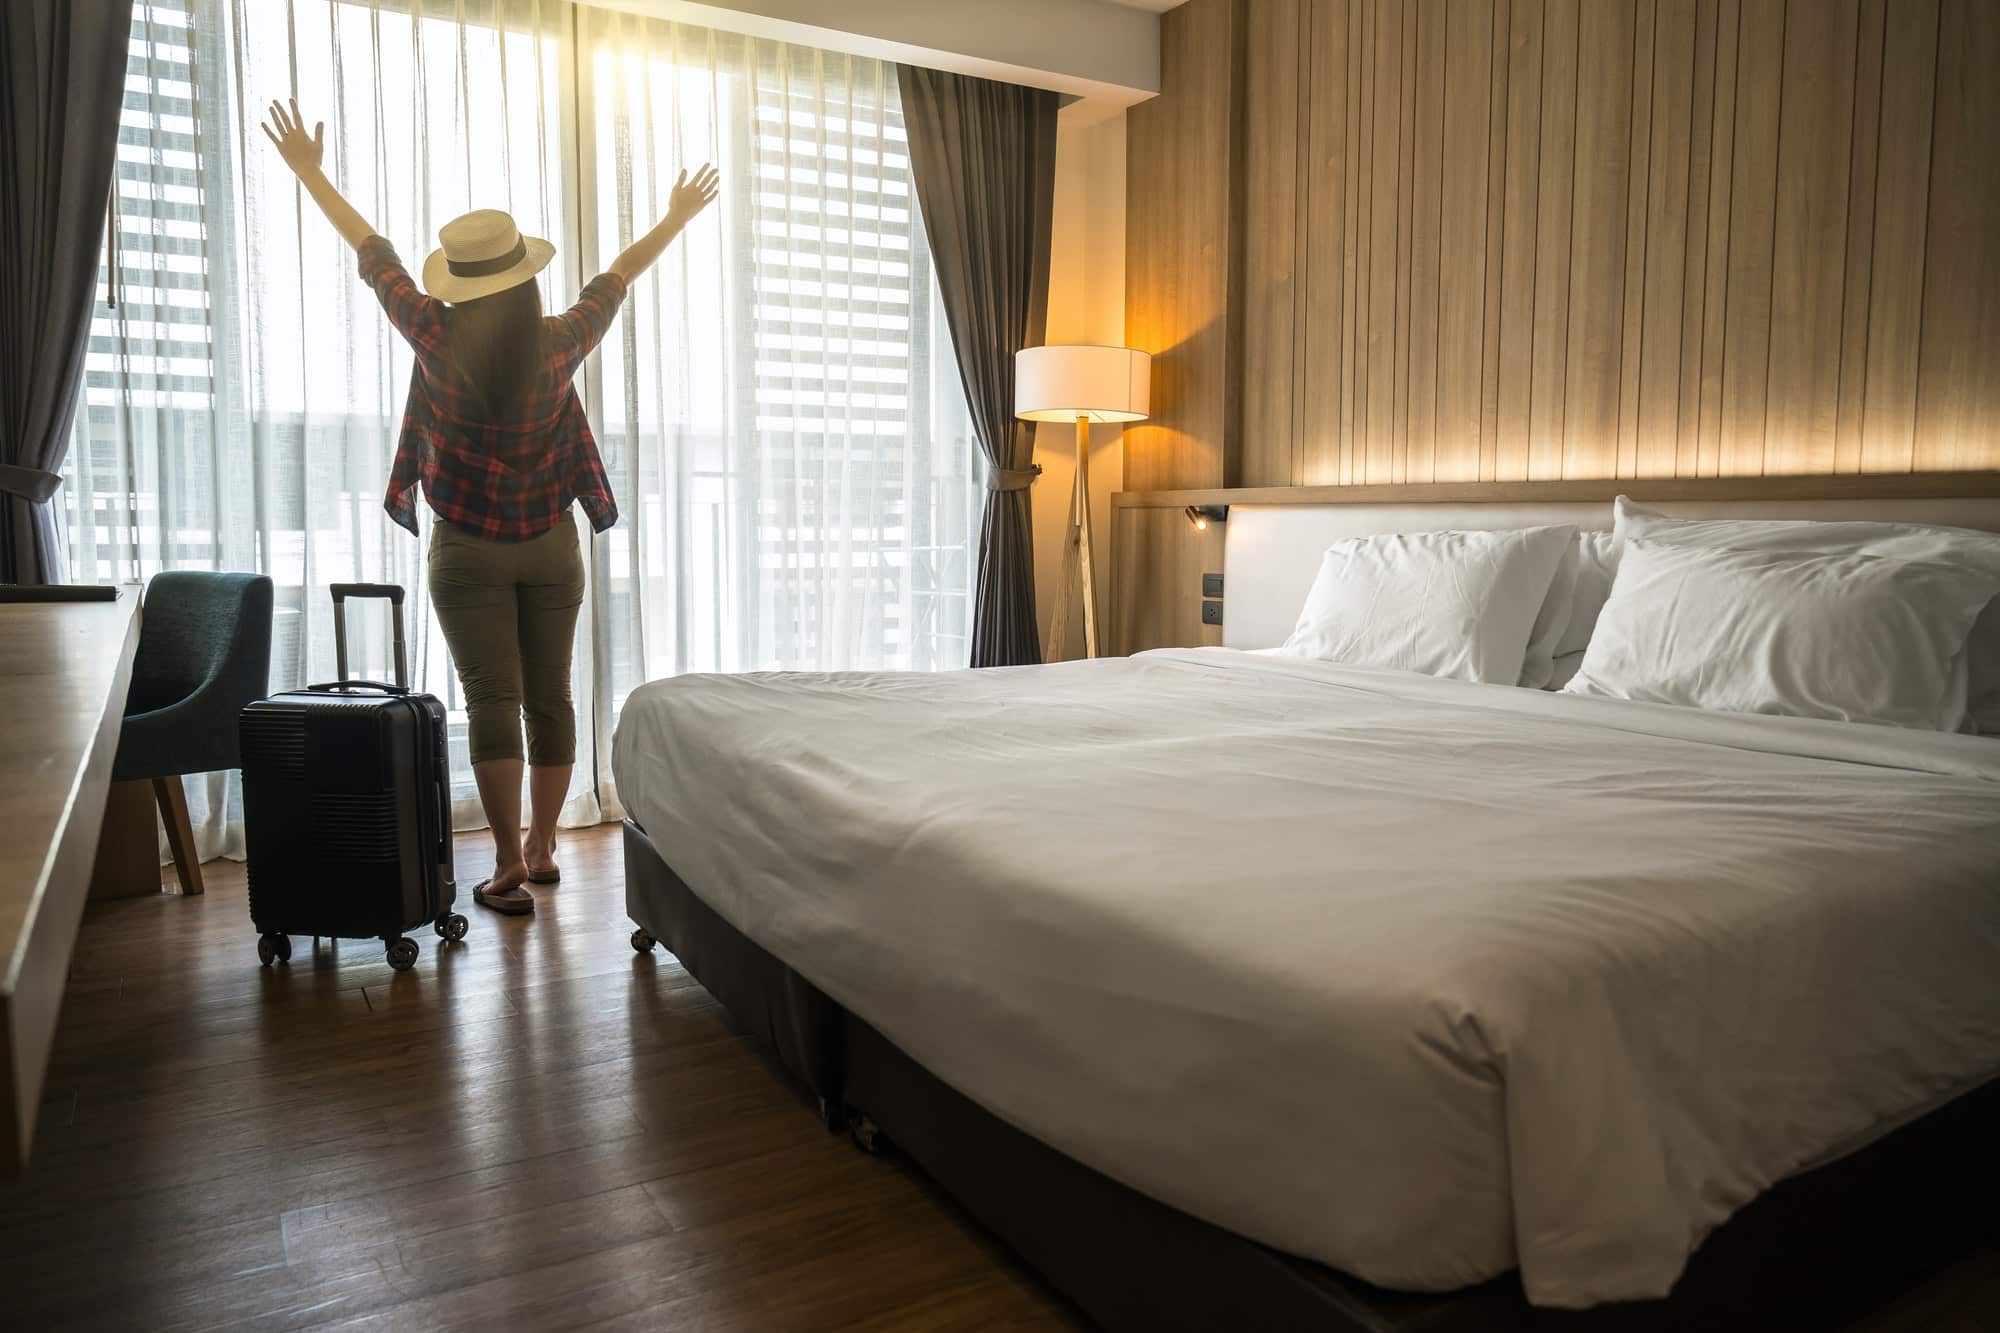 Happiness Asian traveler woman standing with baggage in bedroom of hotel or hostel